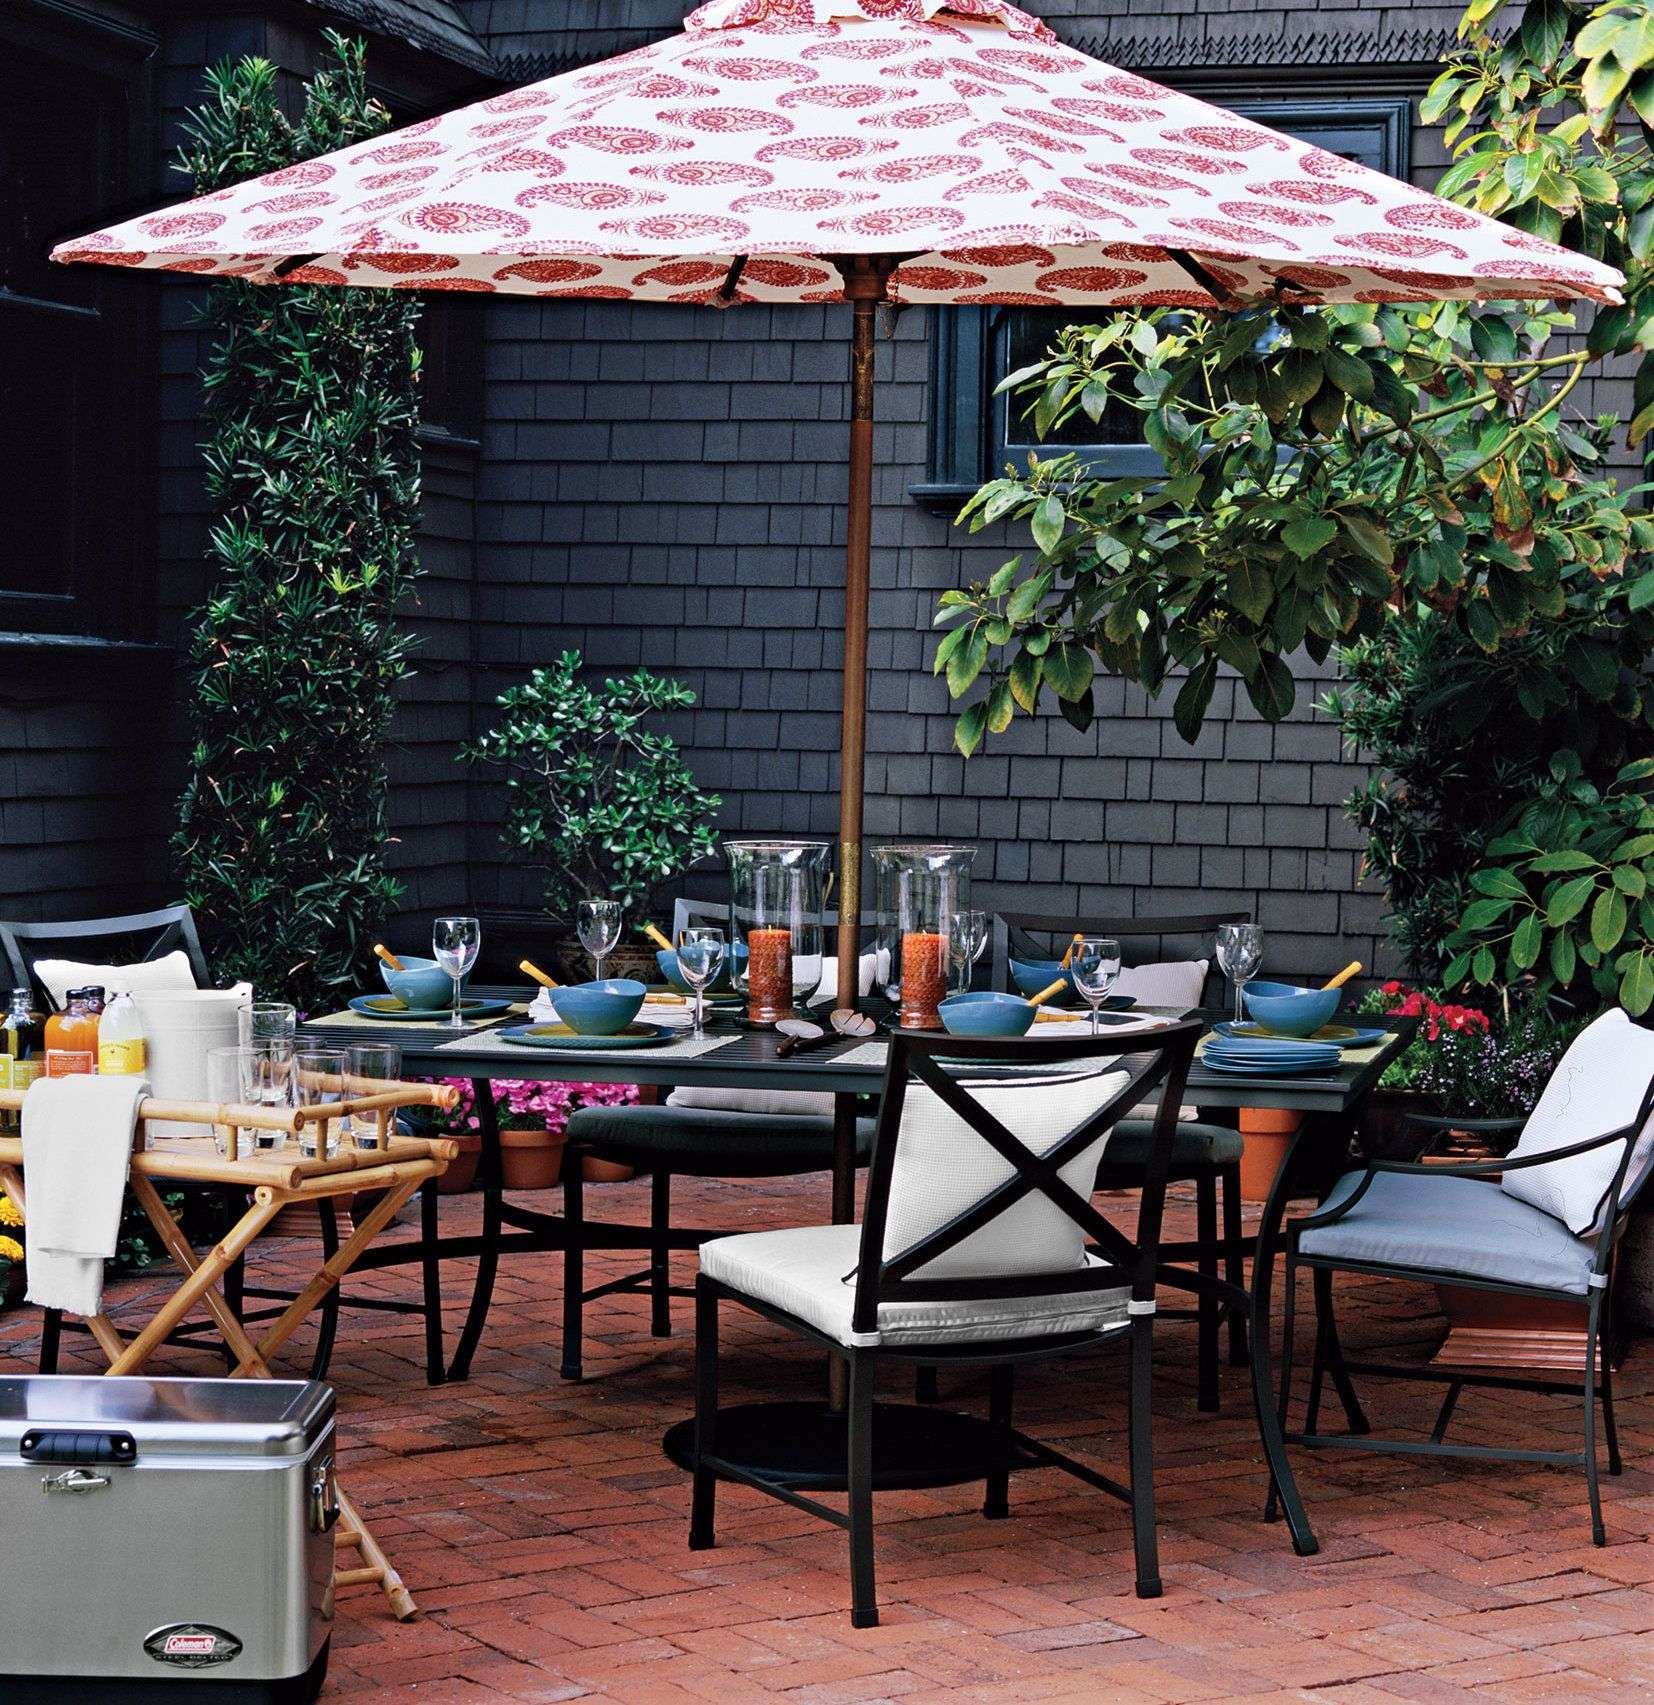 Coleman Patio Furniture Covers